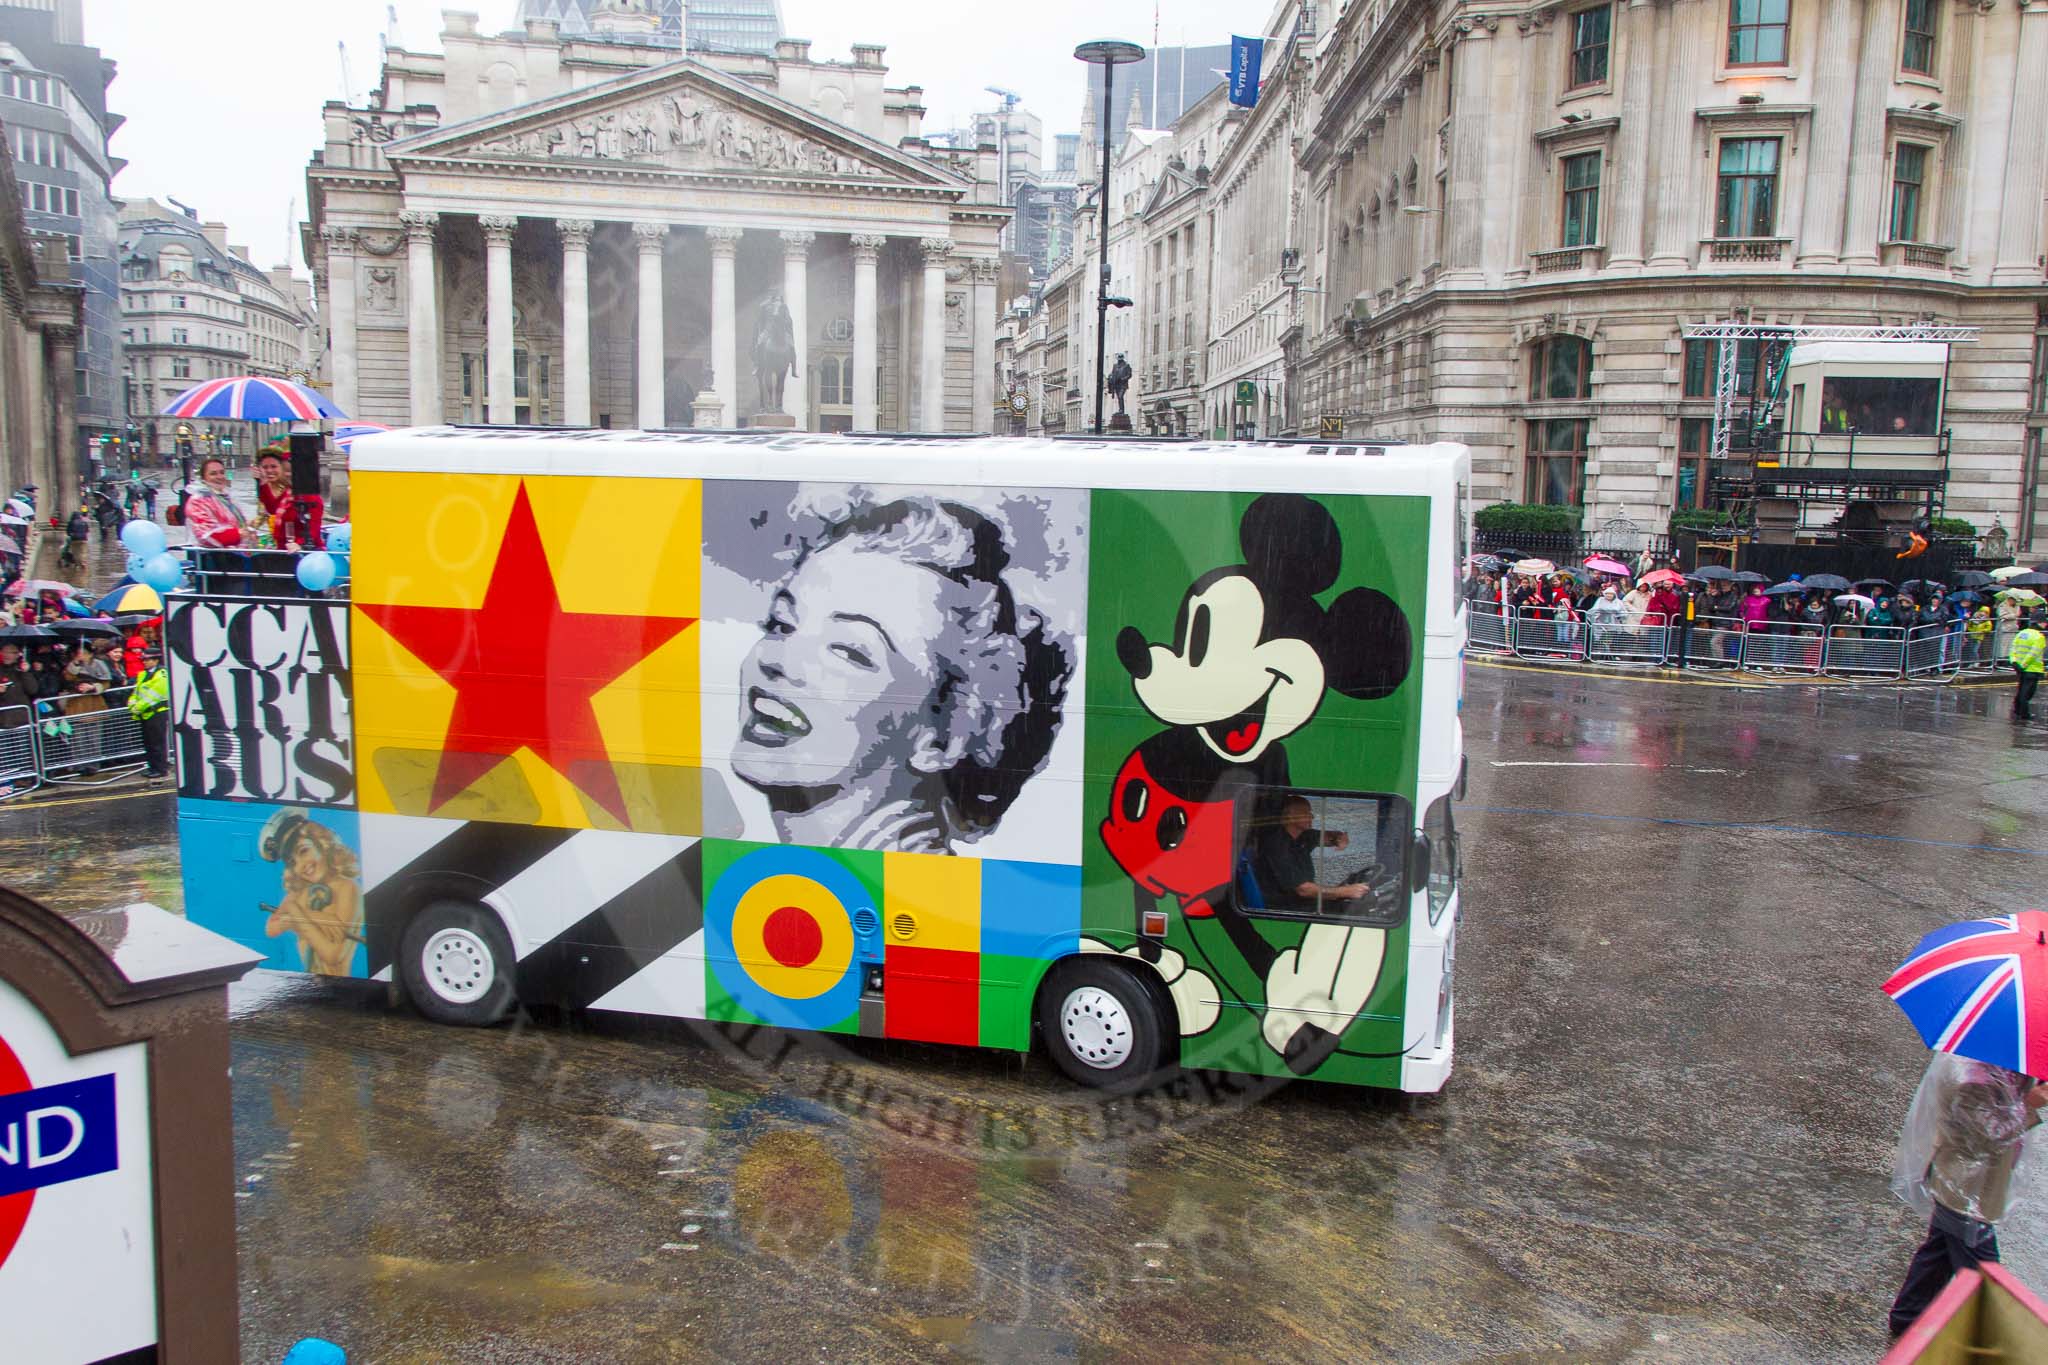 Lord Mayor's Show 2013: 58-CCA ART BUS-is mobile work of art and art gallery designed by Sir Peter Blake..
Press stand opposite Mansion House, City of London,
London,
Greater London,
United Kingdom,
on 09 November 2013 at 11:31, image #730